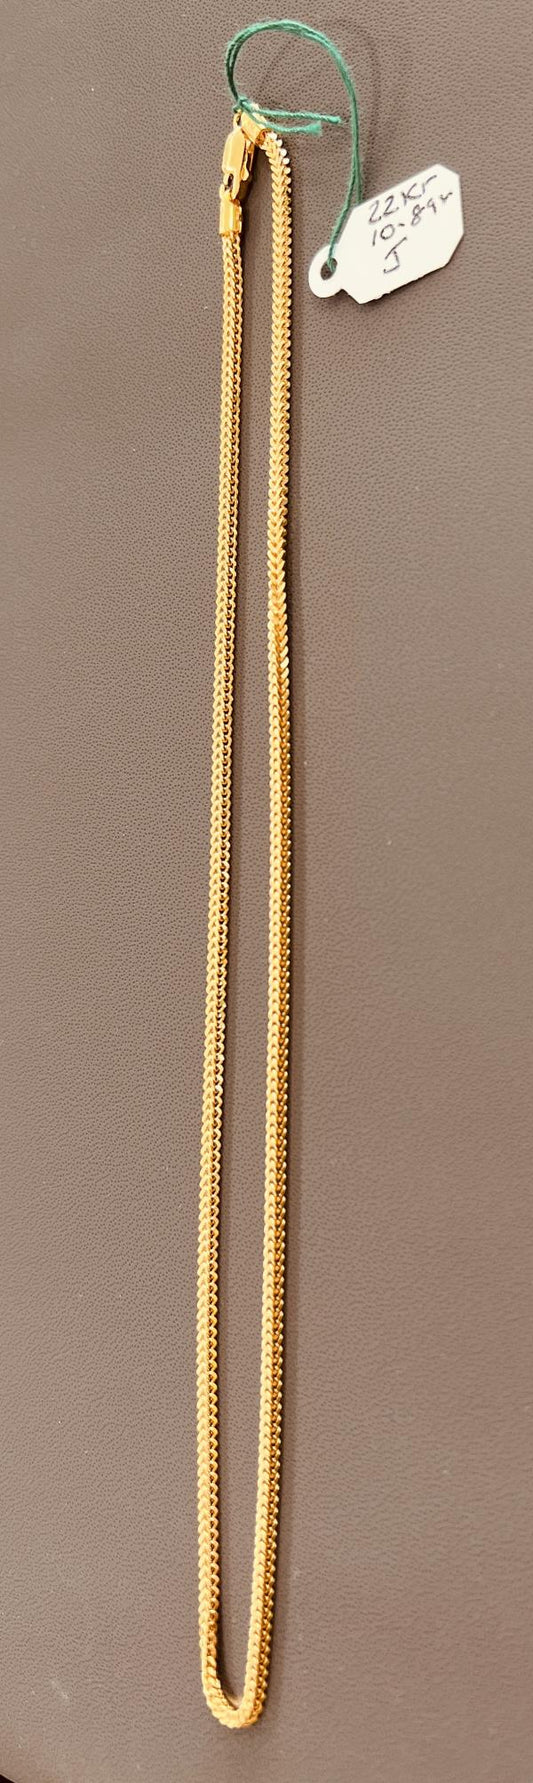 22KT GOLD CHAIN 16" 10.8GM